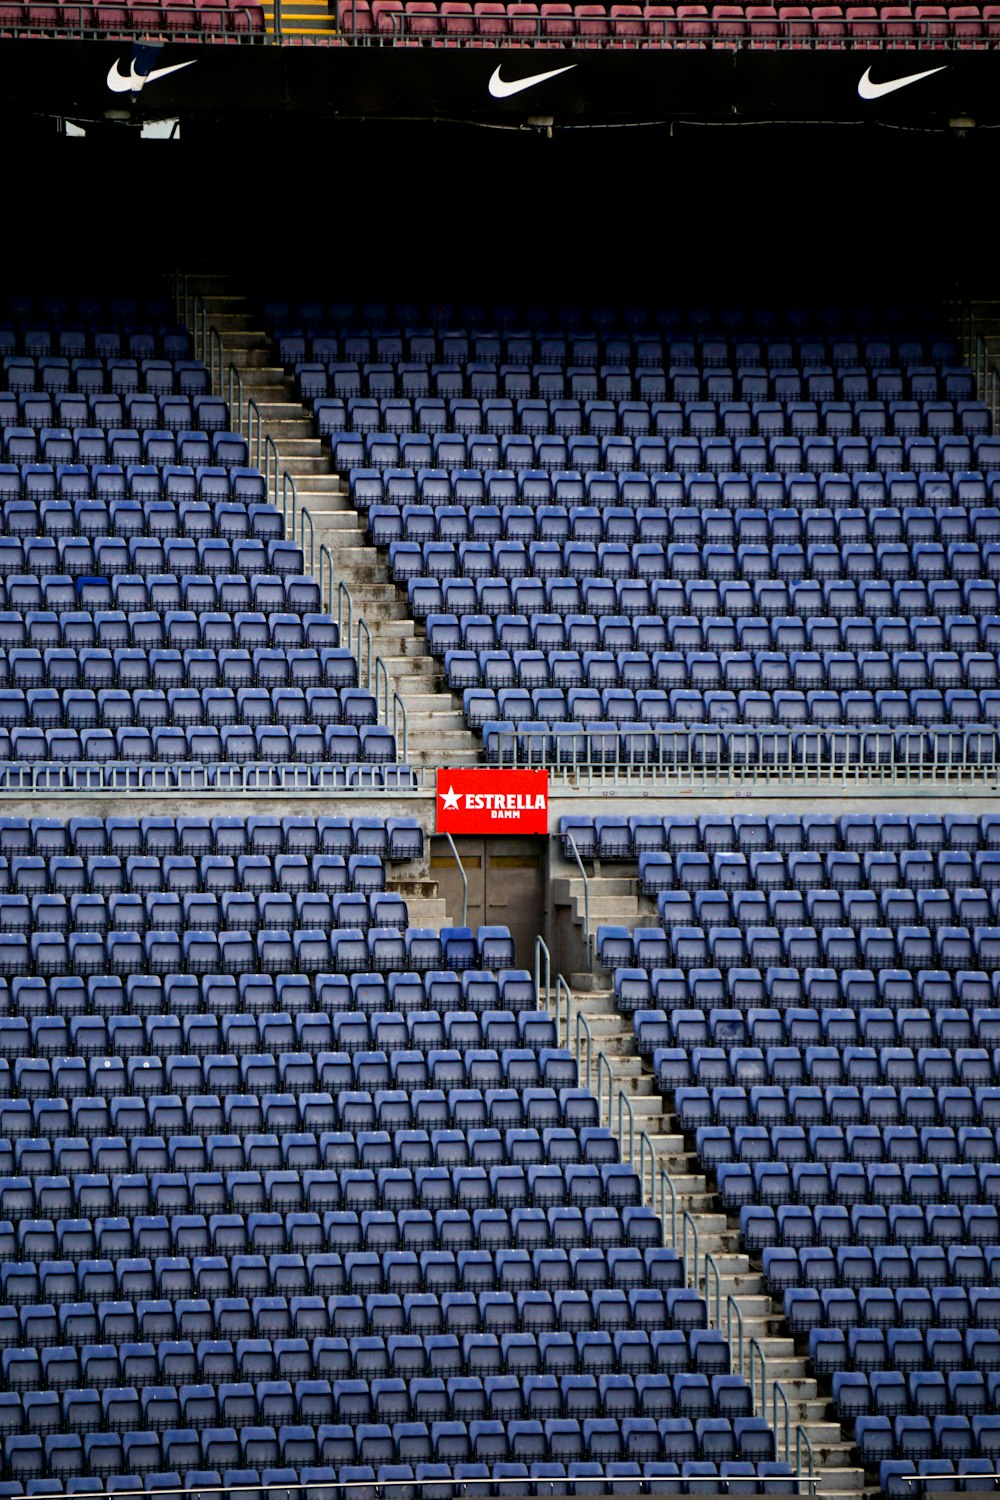 a stadium with blue seats and a red sign